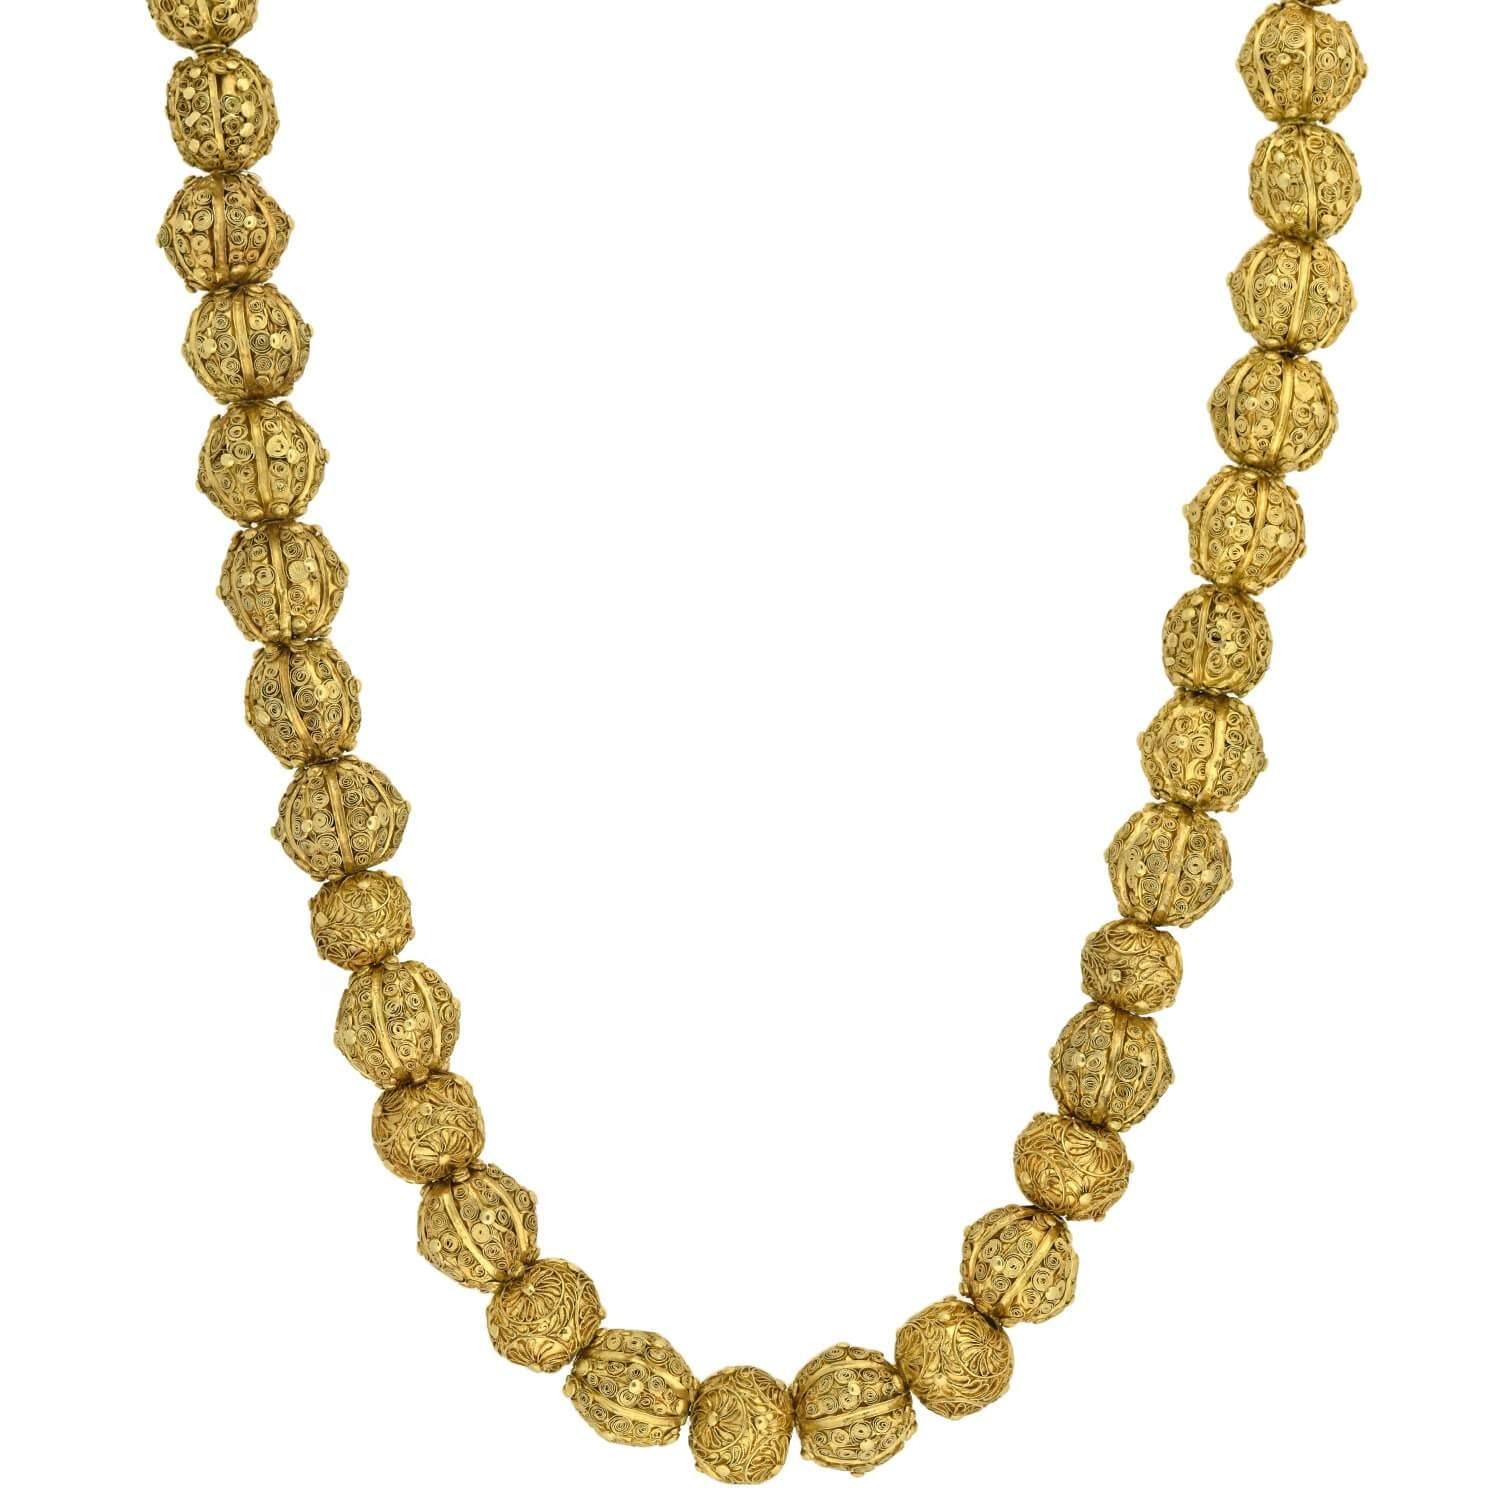 An exceptionally stunning and very rare bead necklace from the Georgian (ca1750) era! This vibrant 22kt yellow gold piece is comprised of 43 handwrought beads which are beautifully decorated with ornate surface wirework, and likely originates from a